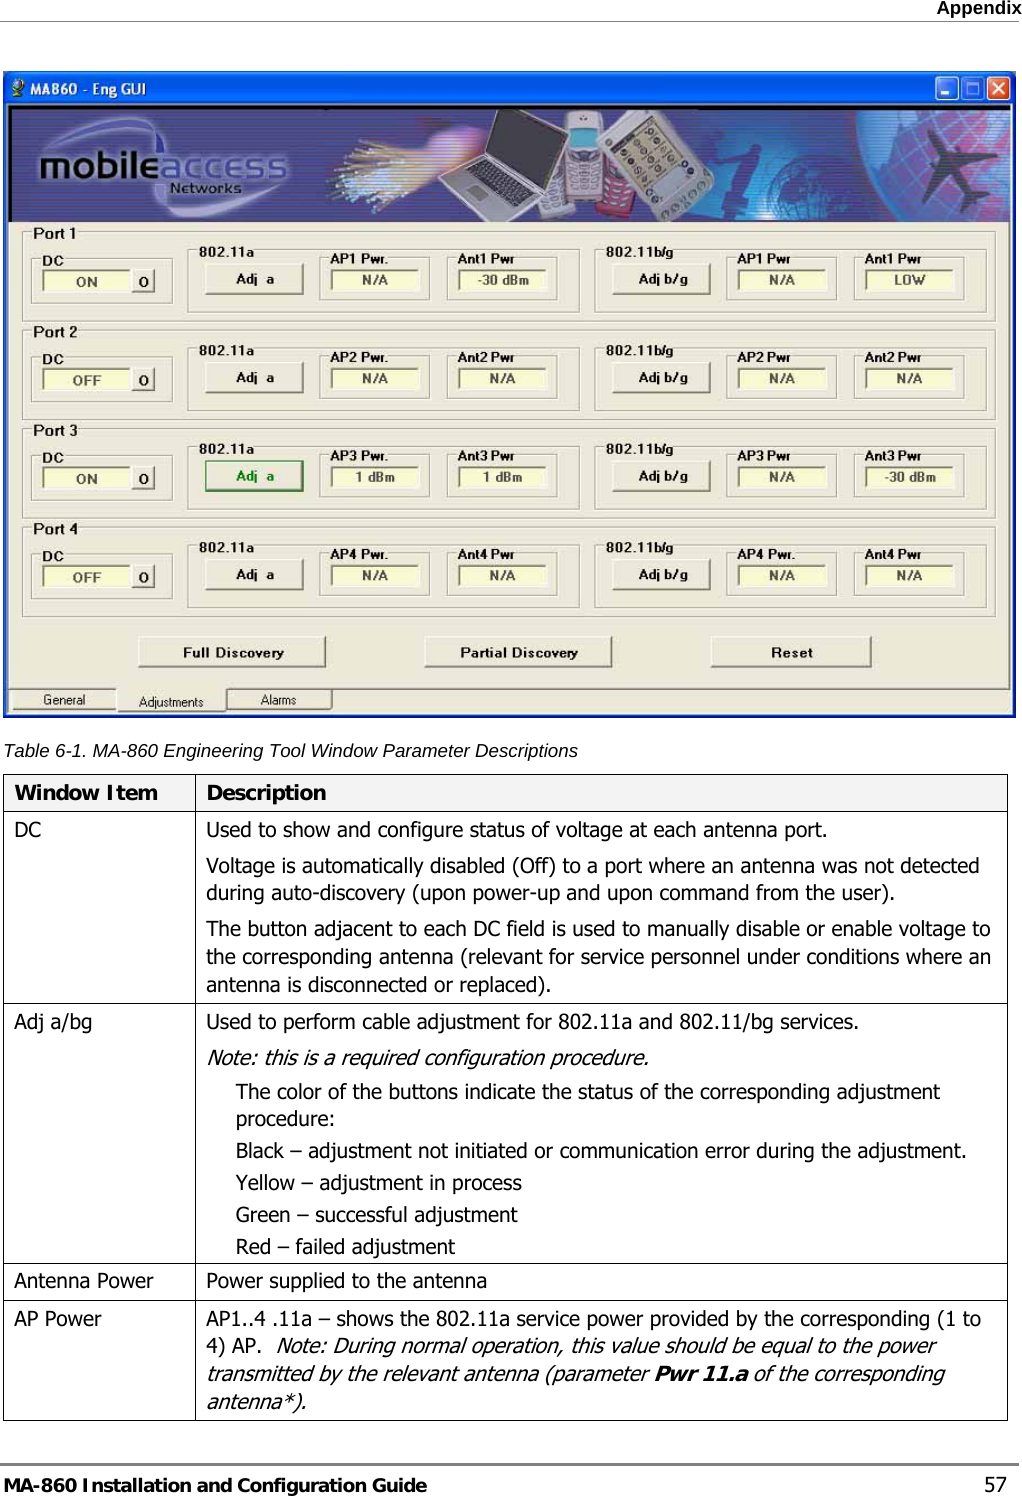  Appendix  Table  6-1. MA-860 Engineering Tool Window Parameter Descriptions Window Item  Description DC  Used to show and configure status of voltage at each antenna port.  Voltage is automatically disabled (Off) to a port where an antenna was not detected during auto-discovery (upon power-up and upon command from the user).  The button adjacent to each DC field is used to manually disable or enable voltage to the corresponding antenna (relevant for service personnel under conditions where an antenna is disconnected or replaced). Adj a/bg  Used to perform cable adjustment for 802.11a and 802.11/bg services.  Note: this is a required configuration procedure. The color of the buttons indicate the status of the corresponding adjustment procedure: Black – adjustment not initiated or communication error during the adjustment.  Yellow – adjustment in process Green – successful adjustment Red – failed adjustment Antenna Power  Power supplied to the antenna  AP Power  AP1..4 .11a – shows the 802.11a service power provided by the corresponding (1 to 4) AP.  Note: During normal operation, this value should be equal to the power transmitted by the relevant antenna (parameter Pwr 11.a of the corresponding antenna*). MA-860 Installation and Configuration Guide    57 